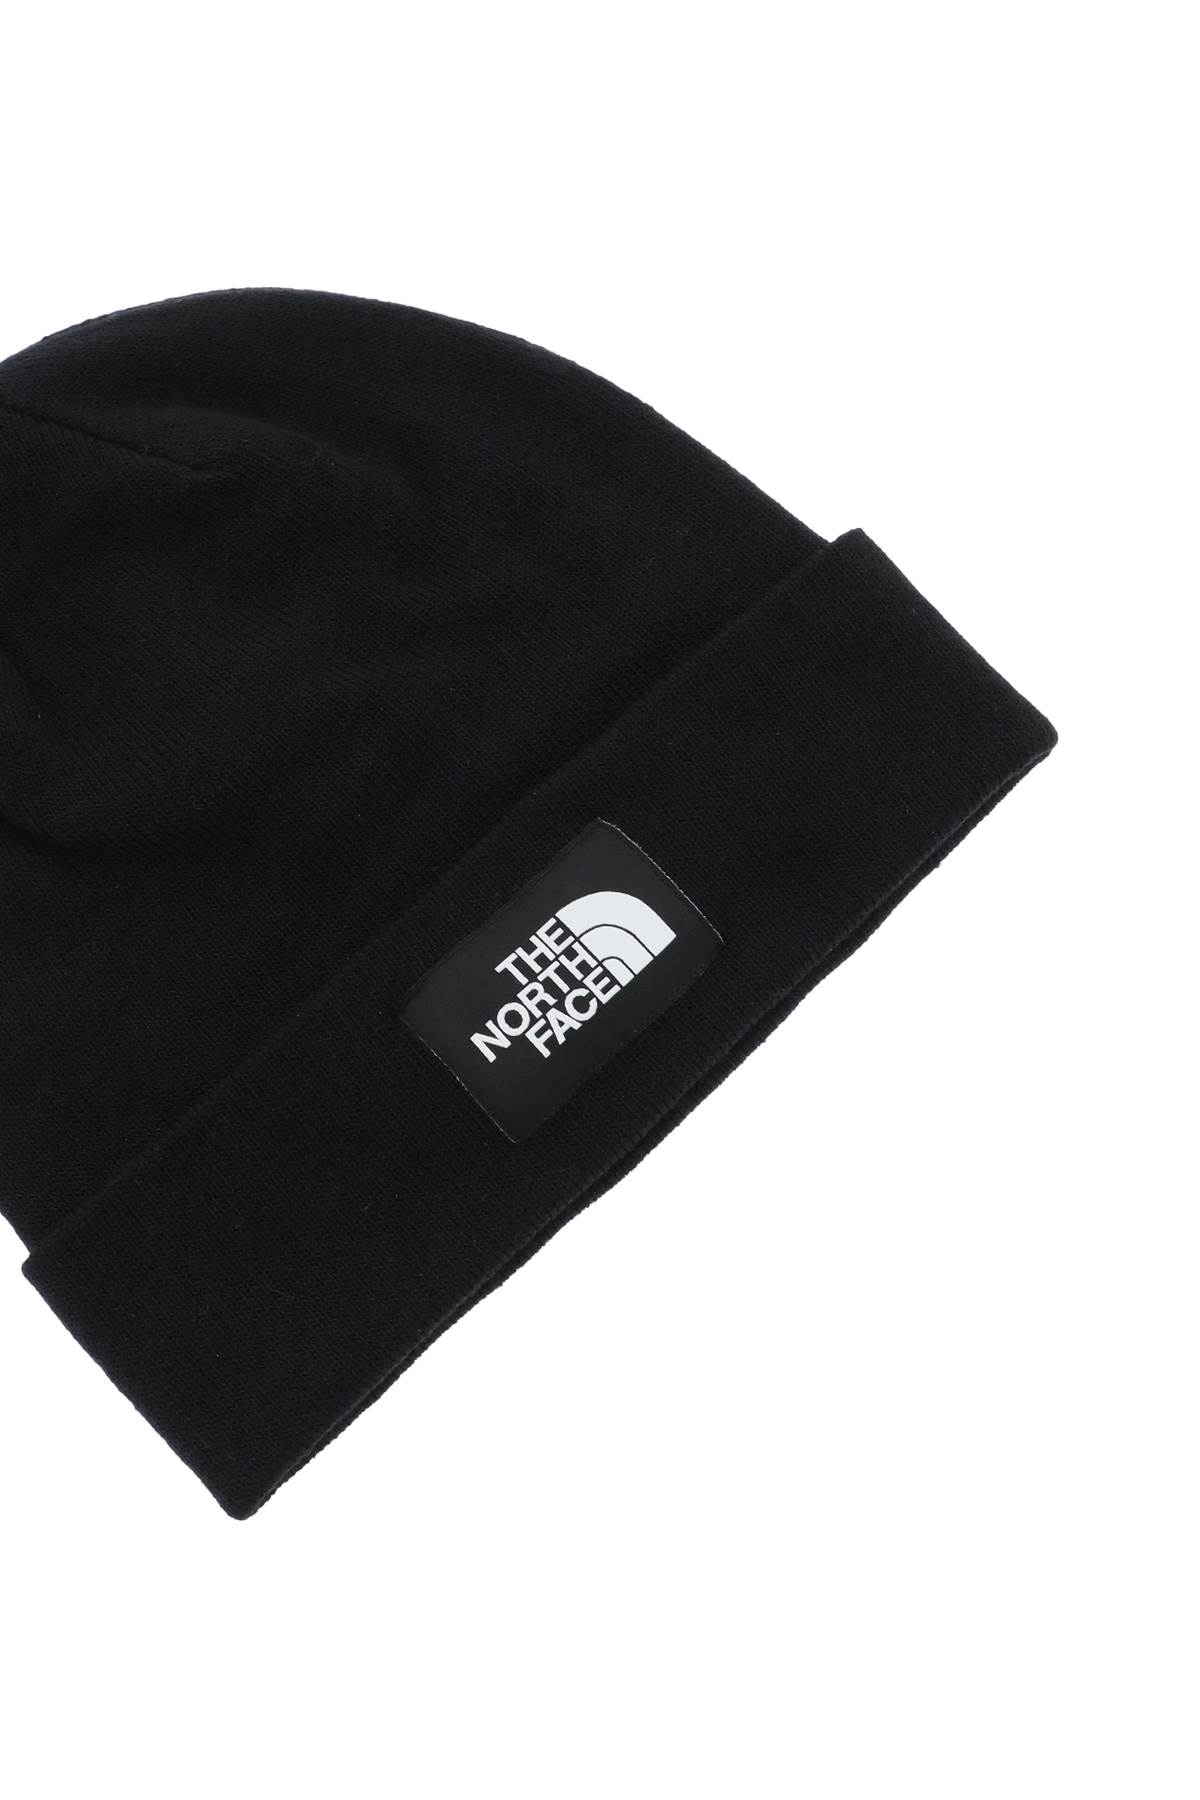 Shop The North Face Dock Worker Beanie Hat In Tnf Black (black)